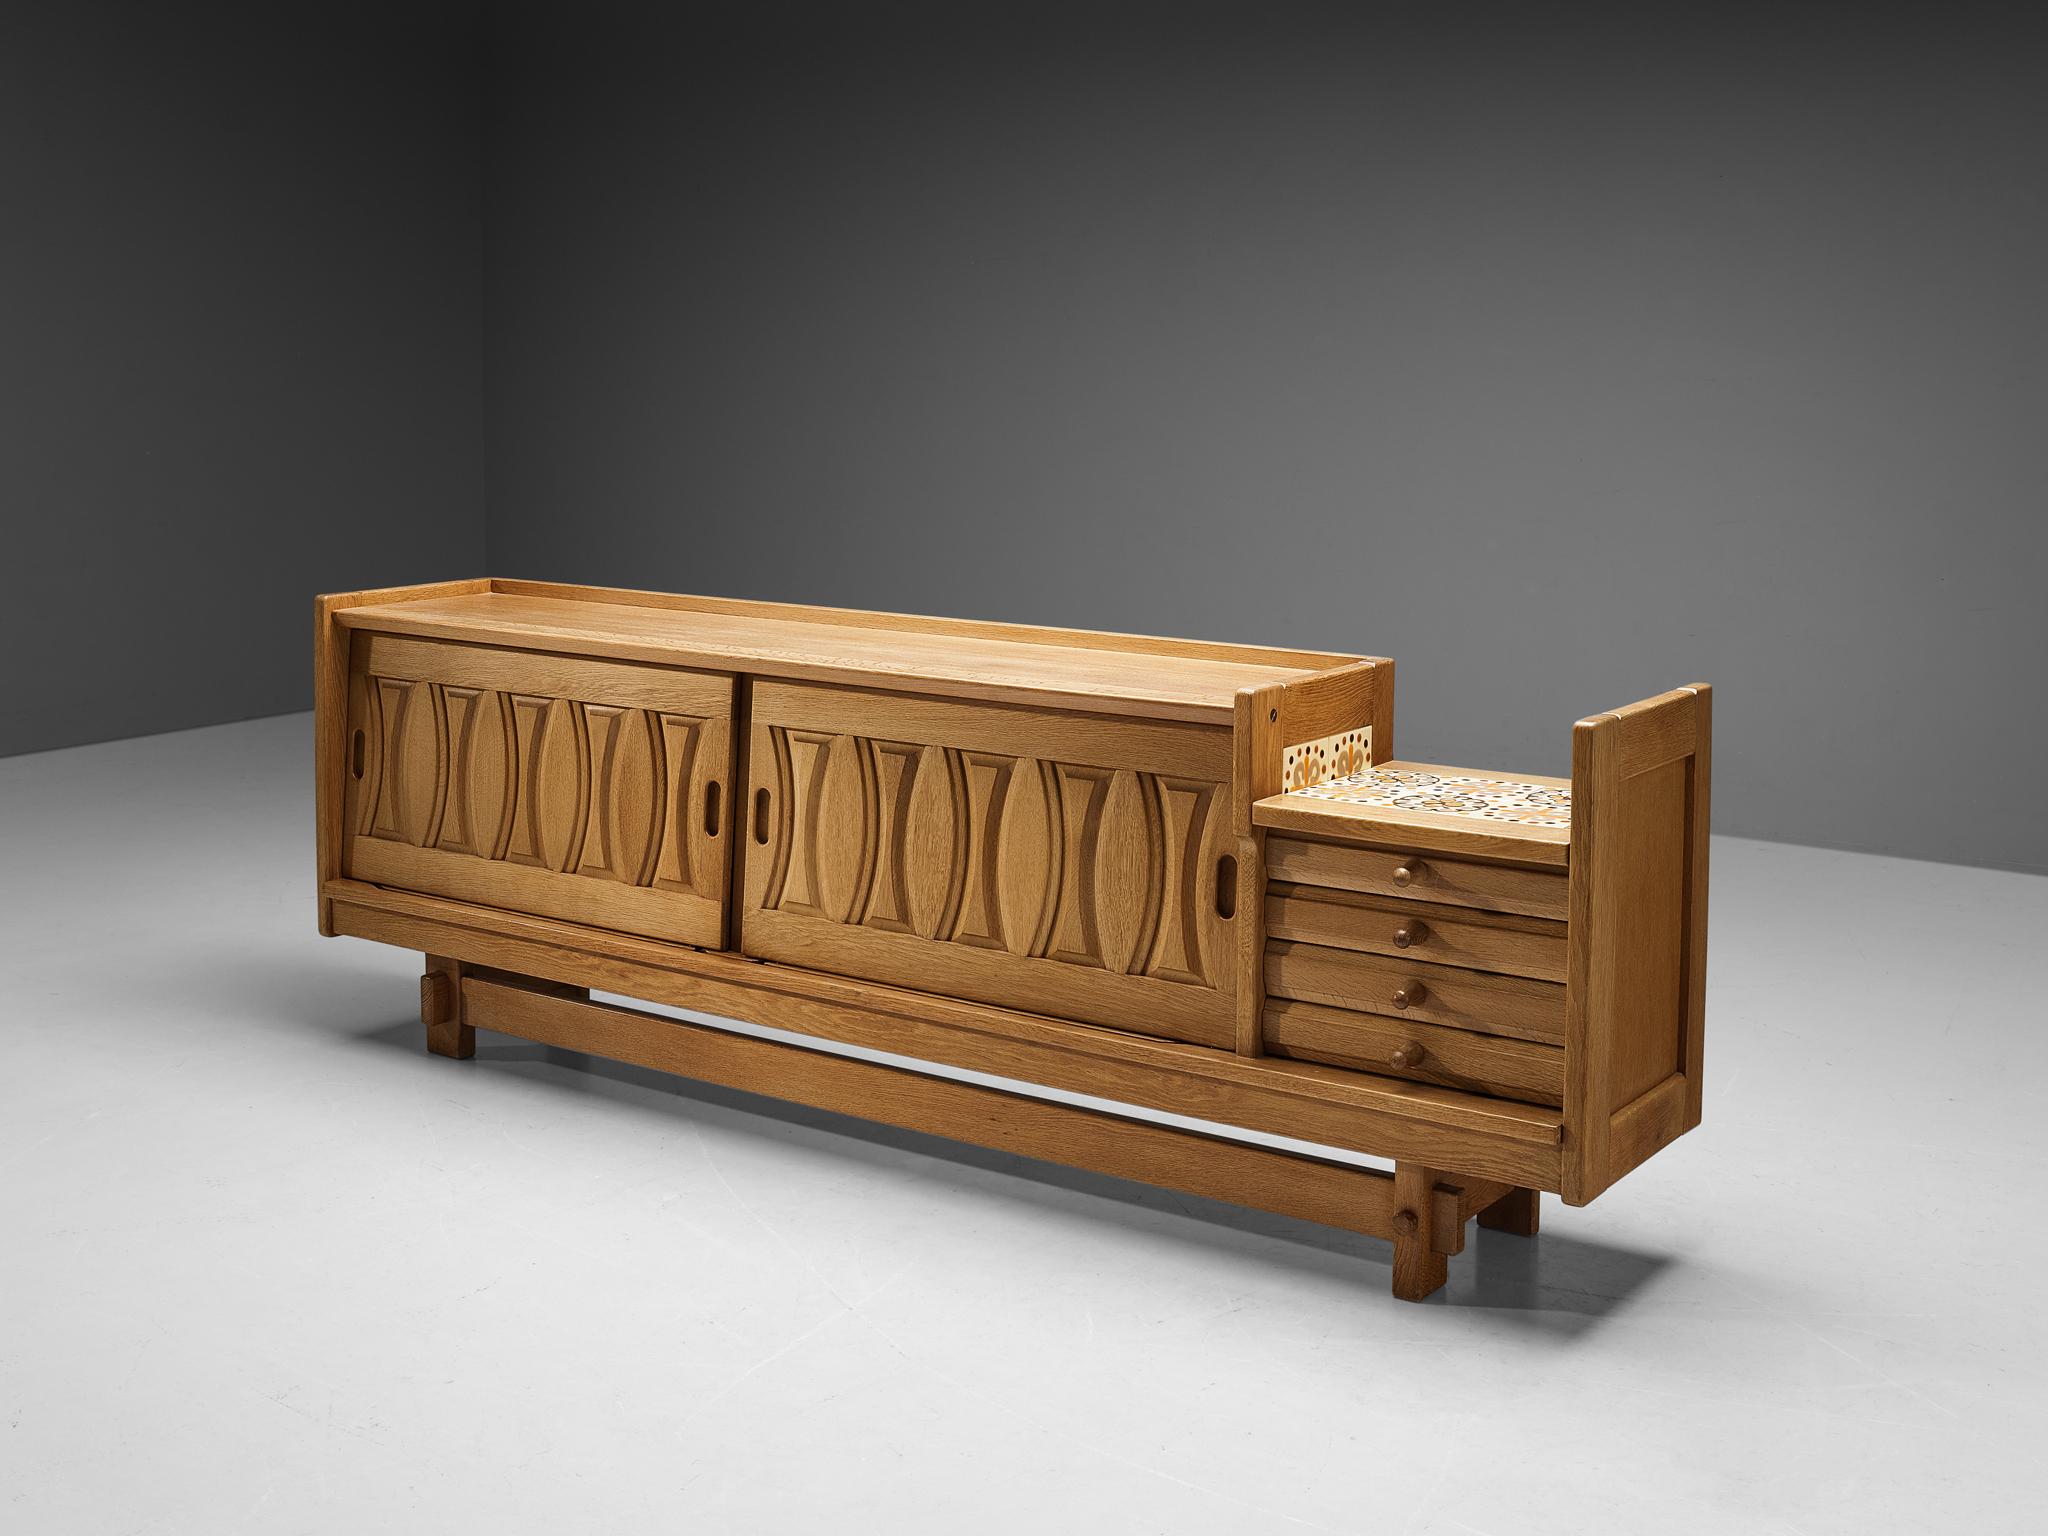 Guillerme et Chambron for Votre Maison, sideboard, oak, ceramics, France, 1960s.

Credenza in oak by French designers Guillerme & Chambron. This sideboard is equipped with two sliding doors and a set of four drawers. The front of the sideboard is